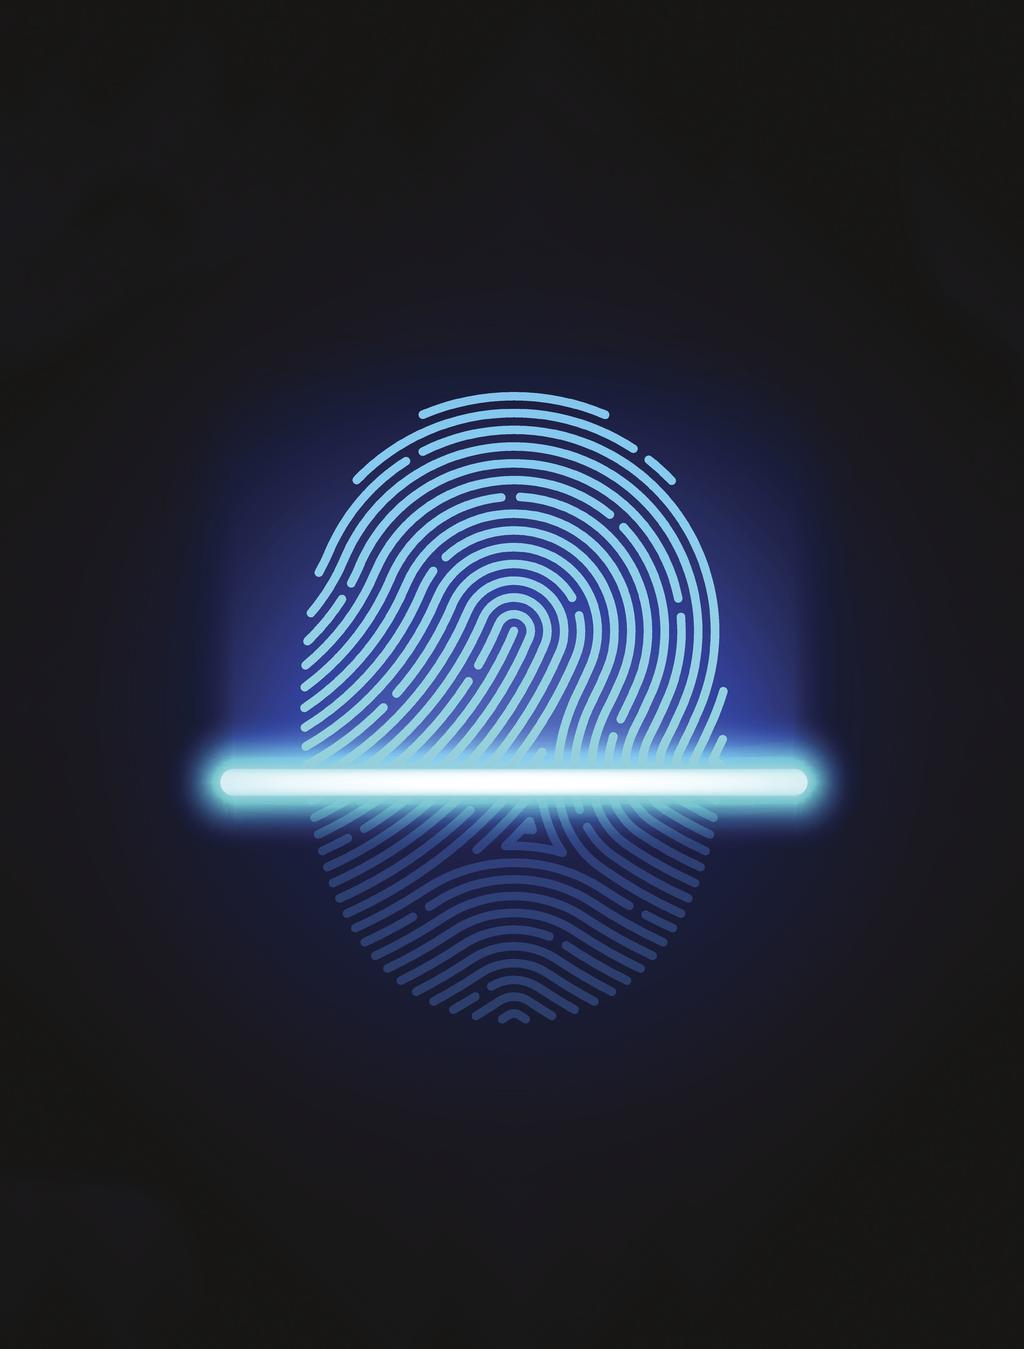 PRIVACY LAW INSLER Understanding the Biometric Information Privacy Act Litigation Explosion BY CHARLES N.